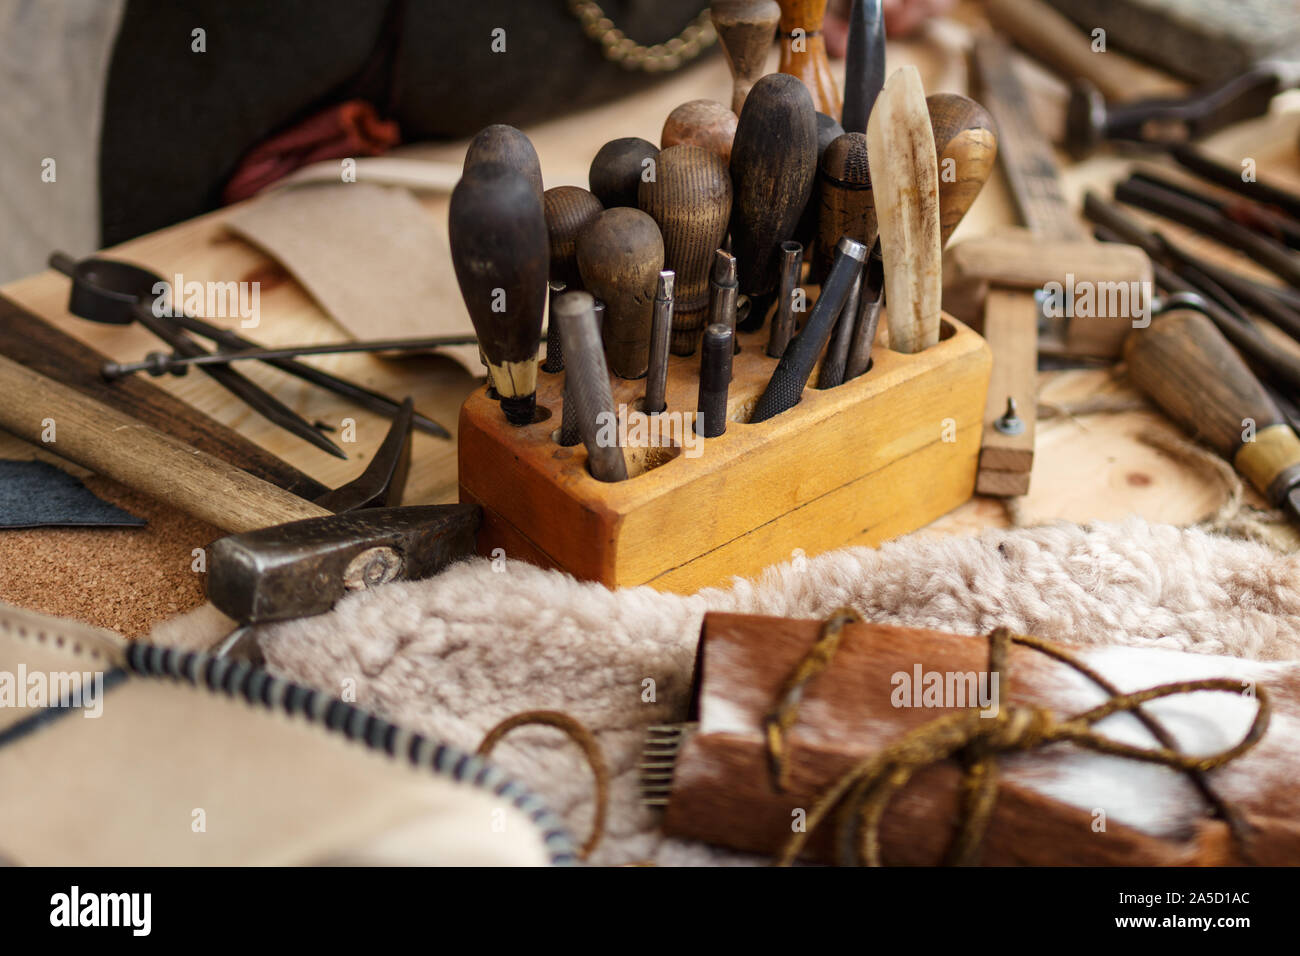 Leather Craft Or Leather Working Leather Working Tools And Cut Out Pieces  Of Leather On Work Desk Stock Photo - Download Image Now - iStock